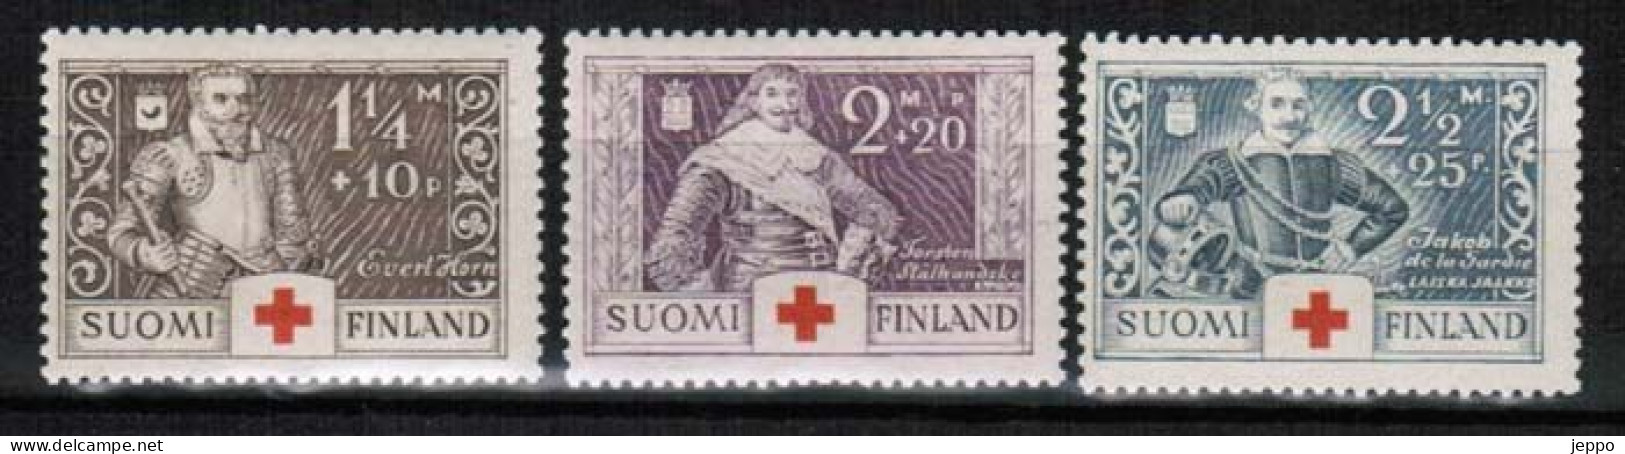 1934 Finland Red Cross Complete Set MNH. - Unused Stamps